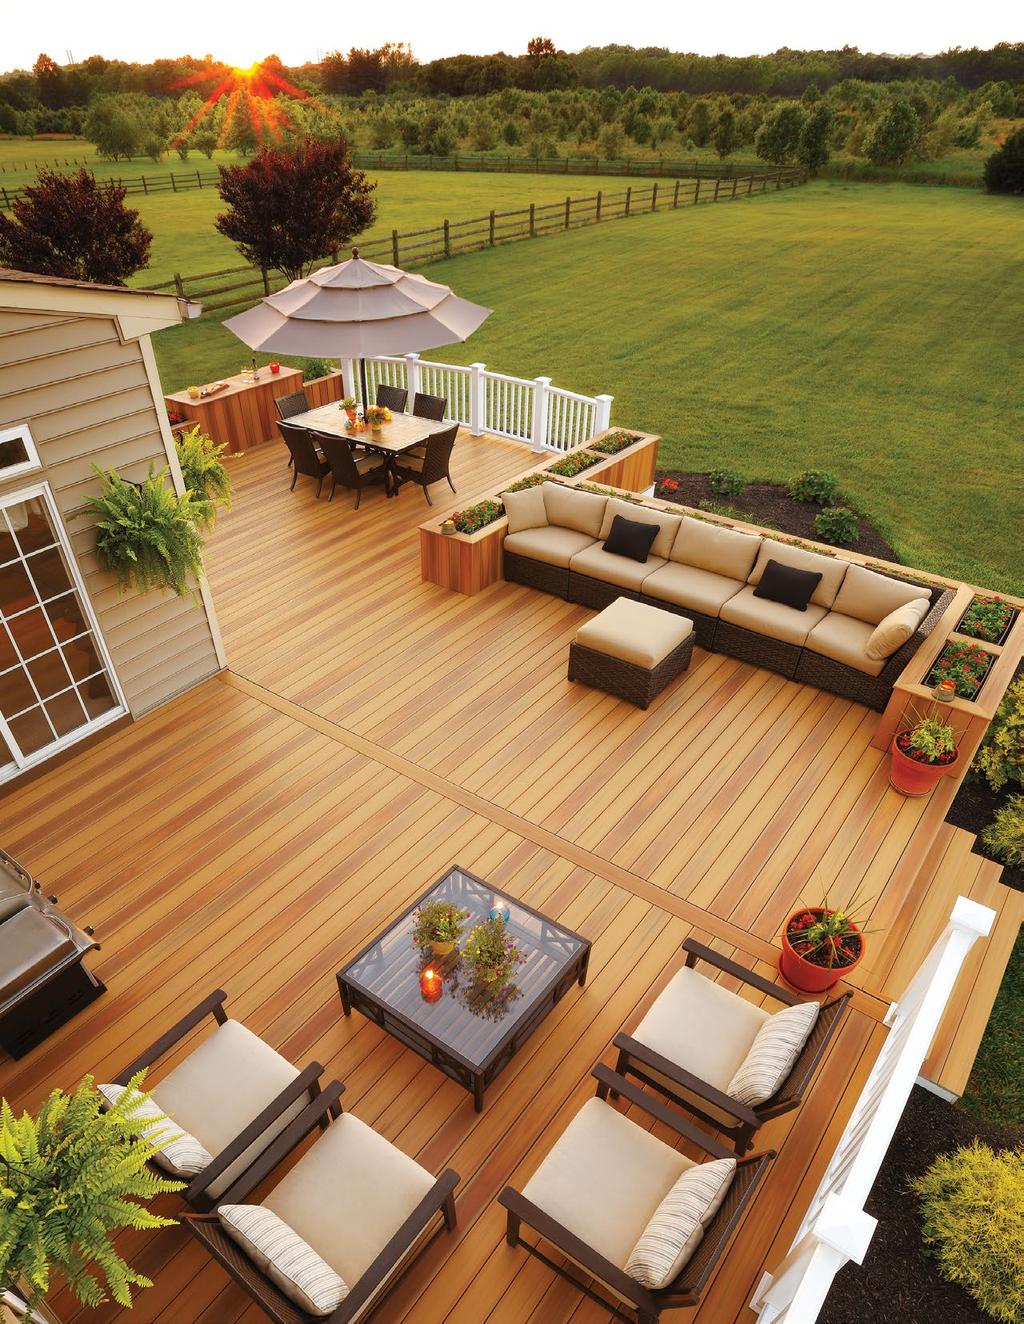 Pick Your Color Our Hardwoods decking features a variegated, non-repeating wood grain that allows you to create your own custom outdoor oasis.